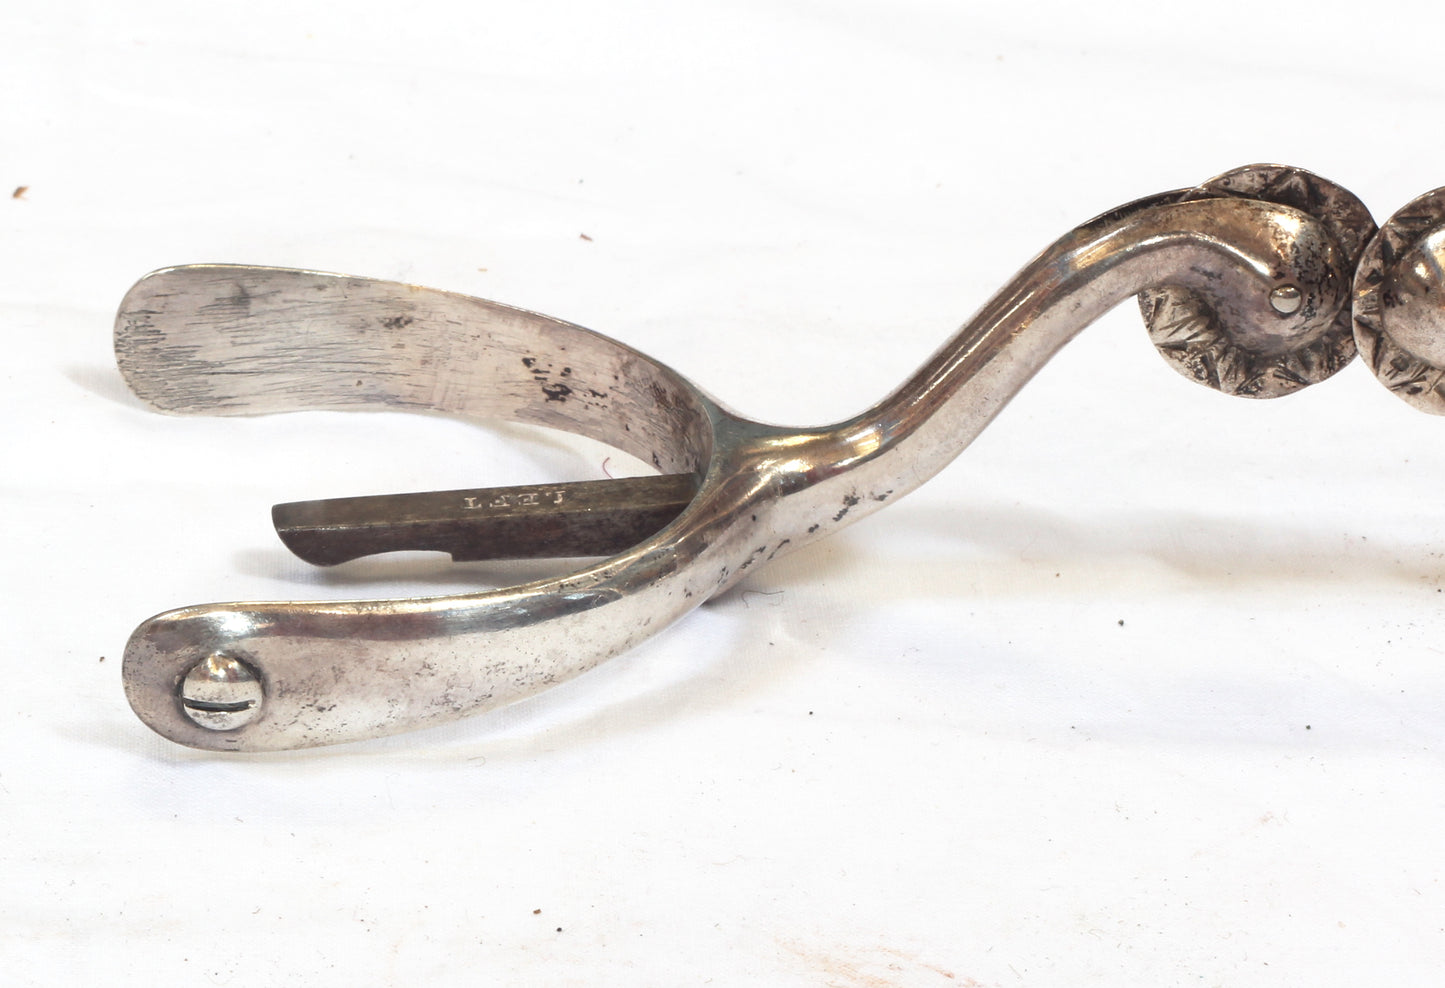 Pair of 1905 HM Silver Swan Necked Military Box Spurs